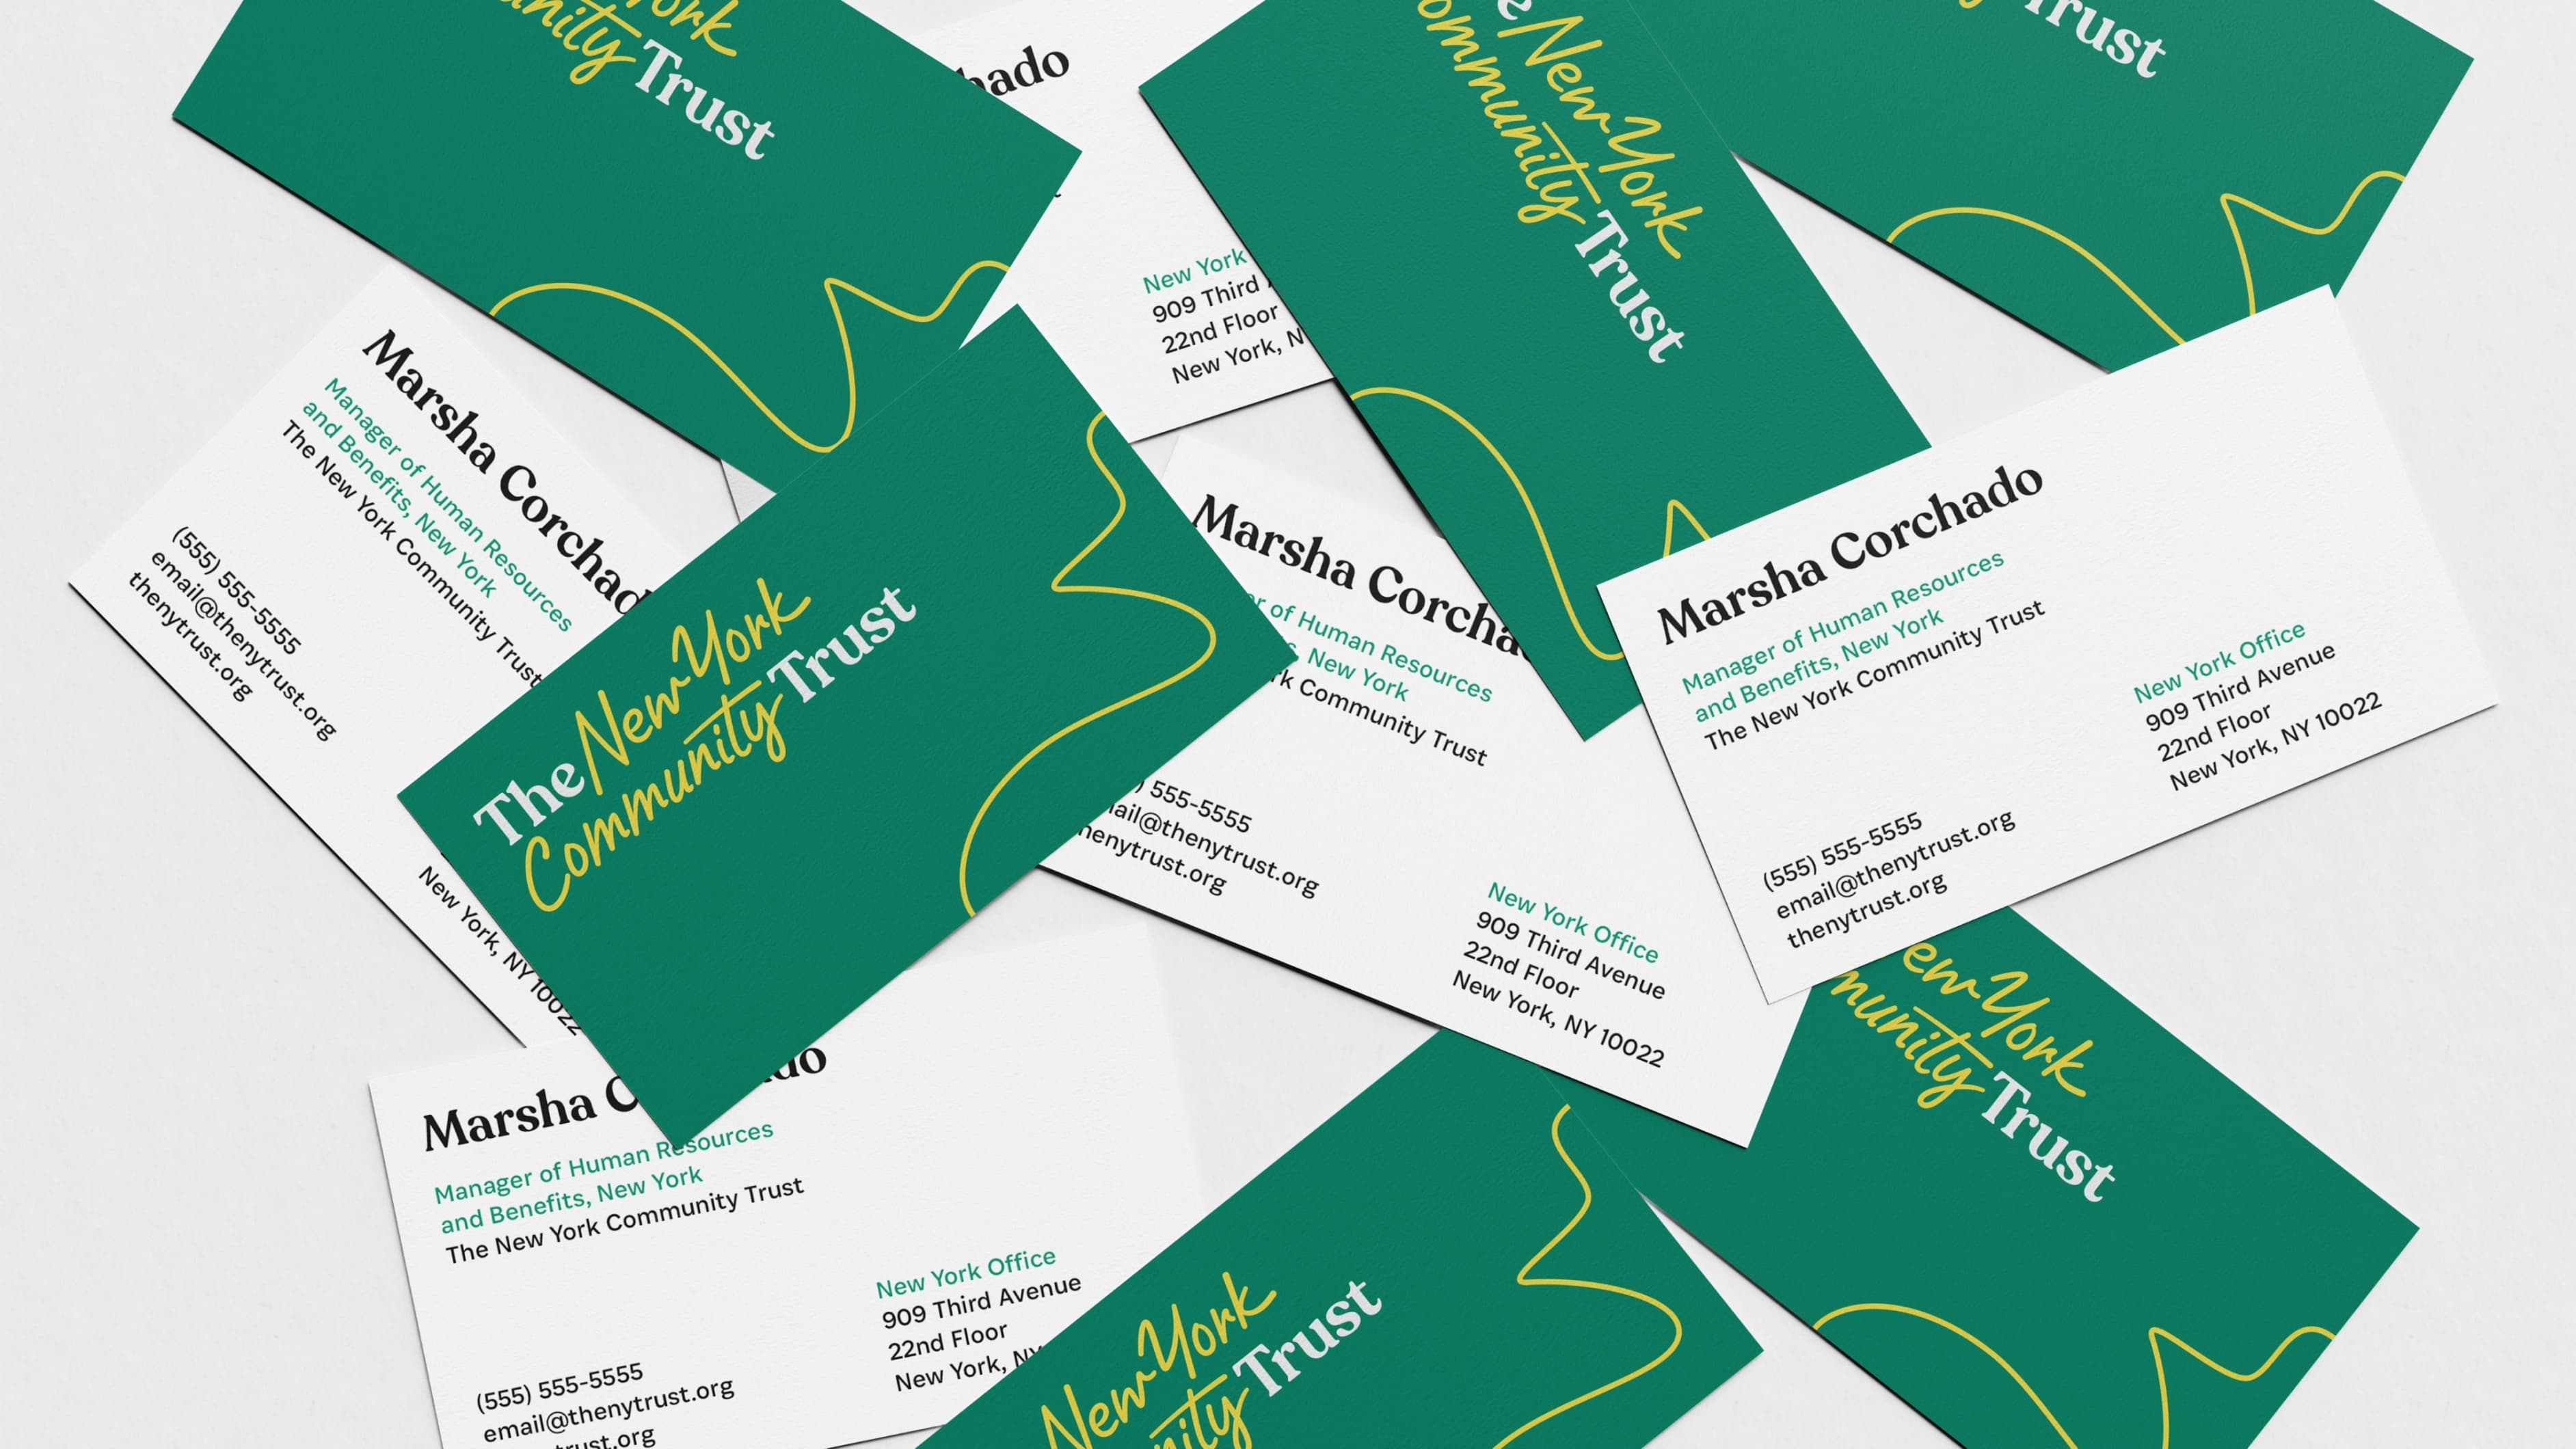 Scattered business cards for Marsha Corchado, Manager of Fund Administration at The New York Community Trust. Cards feature contact information and a green backdrop with the organization's name in yellow.